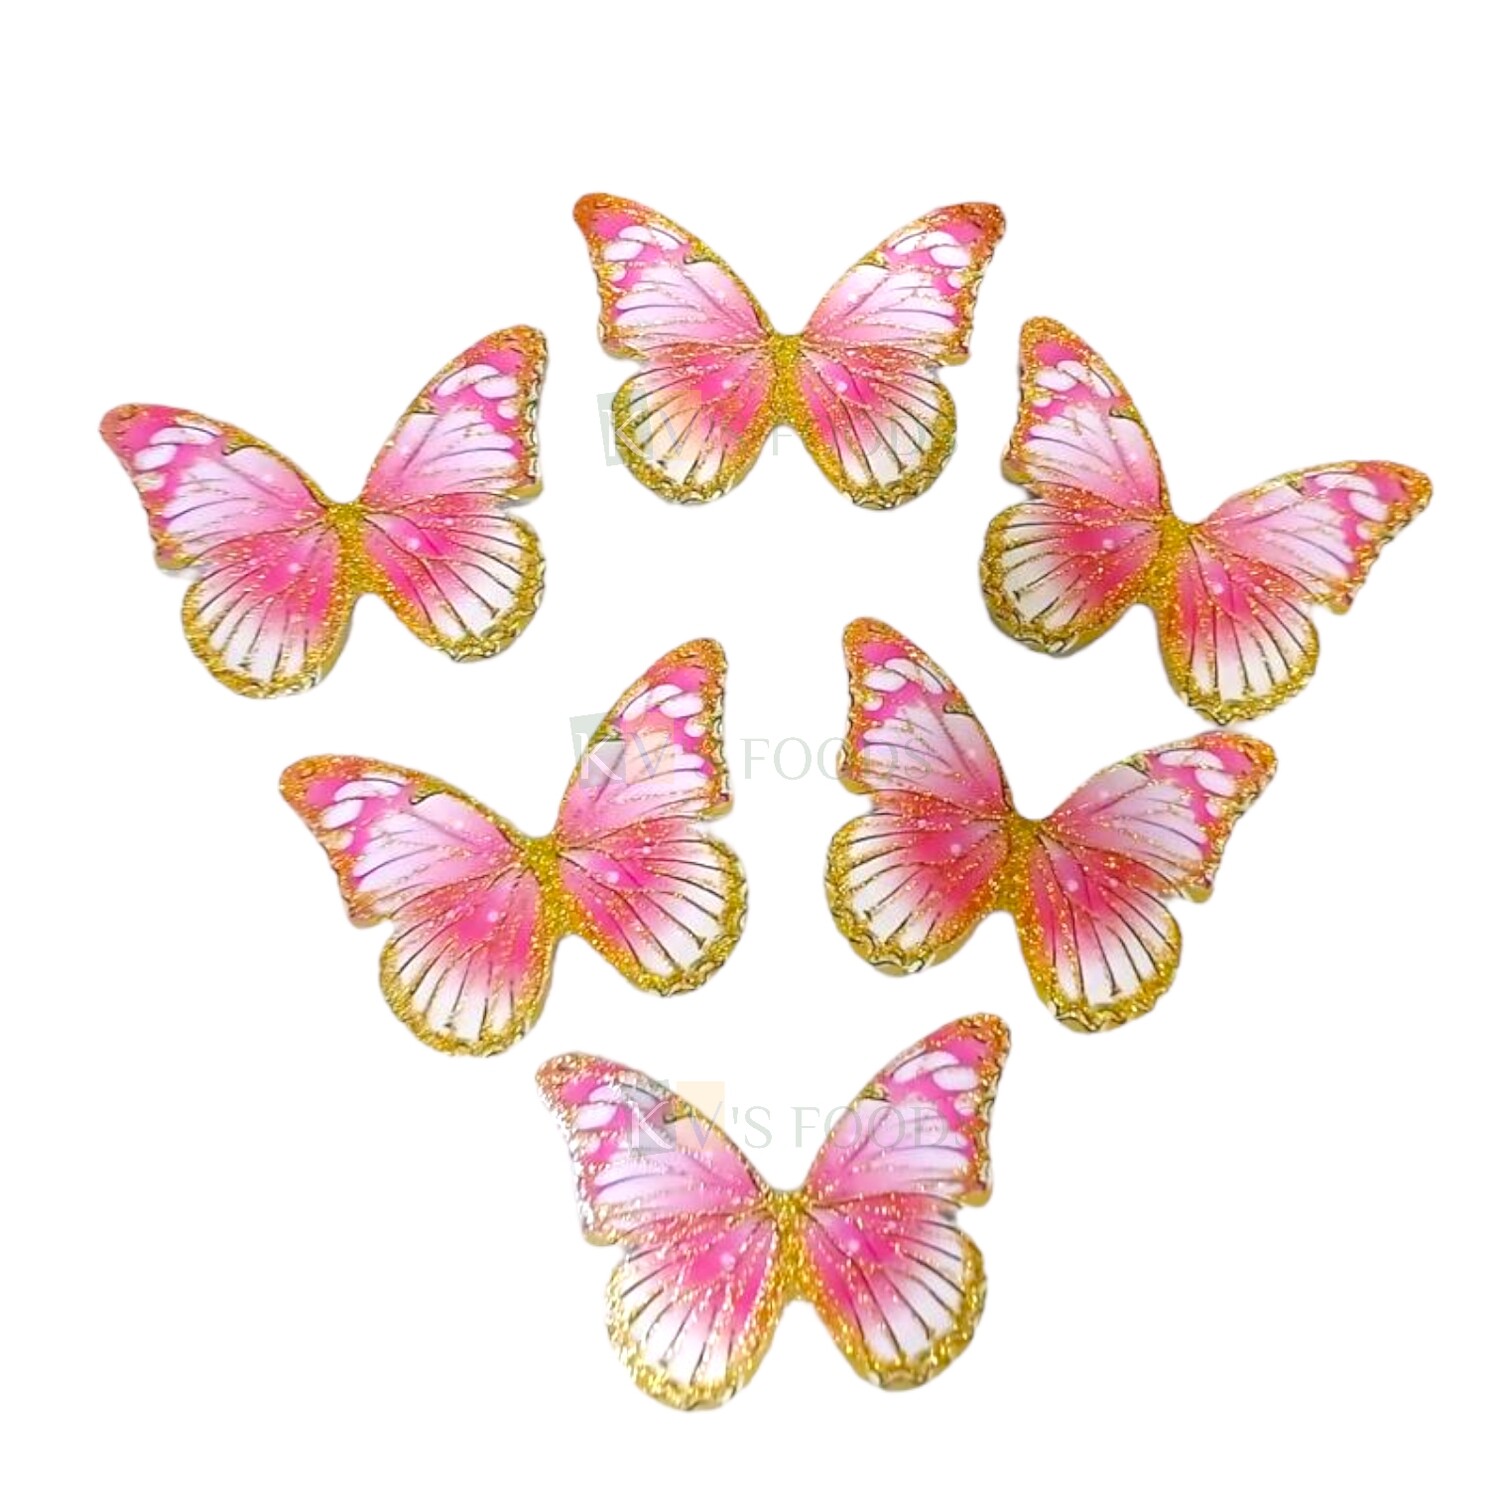 10 PCS Fancy Baby Pink Shade Pattern Golden Border Vein Glitter Hard Paper Foldable Butterfly Cake Toppers, Cupcake Toppers, Birthday Wedding Anniversary Decorations Cake Accessories